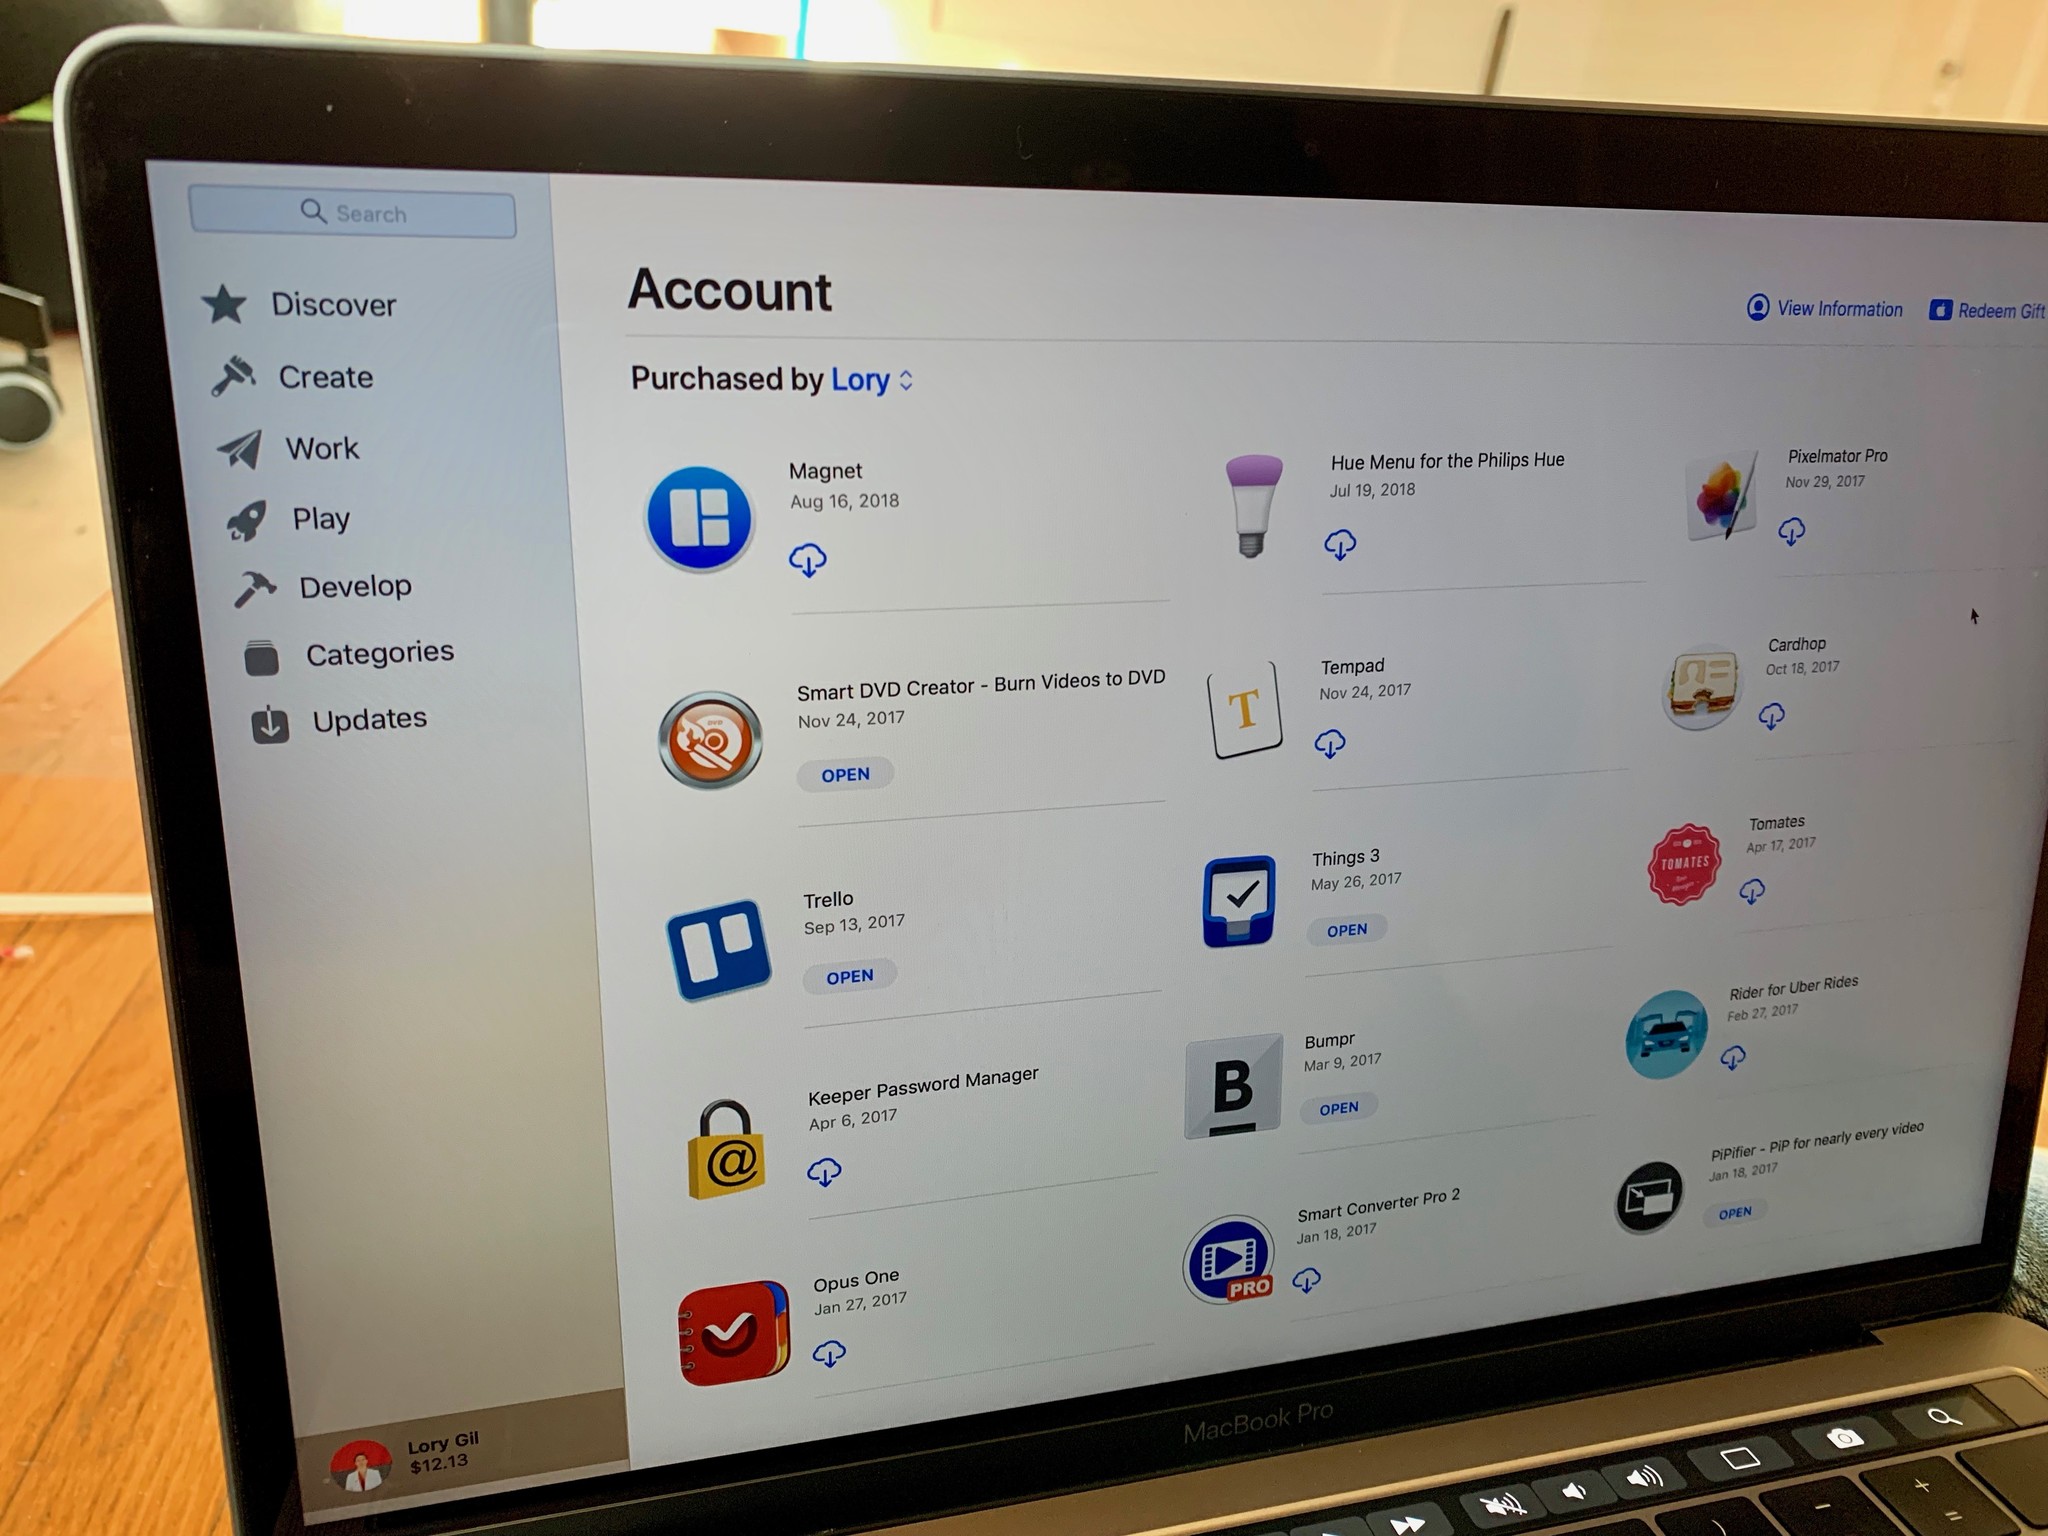 Mac App Store, regulated by Apple, is also an app distribution and download platform that lets users find and download apps for Mac